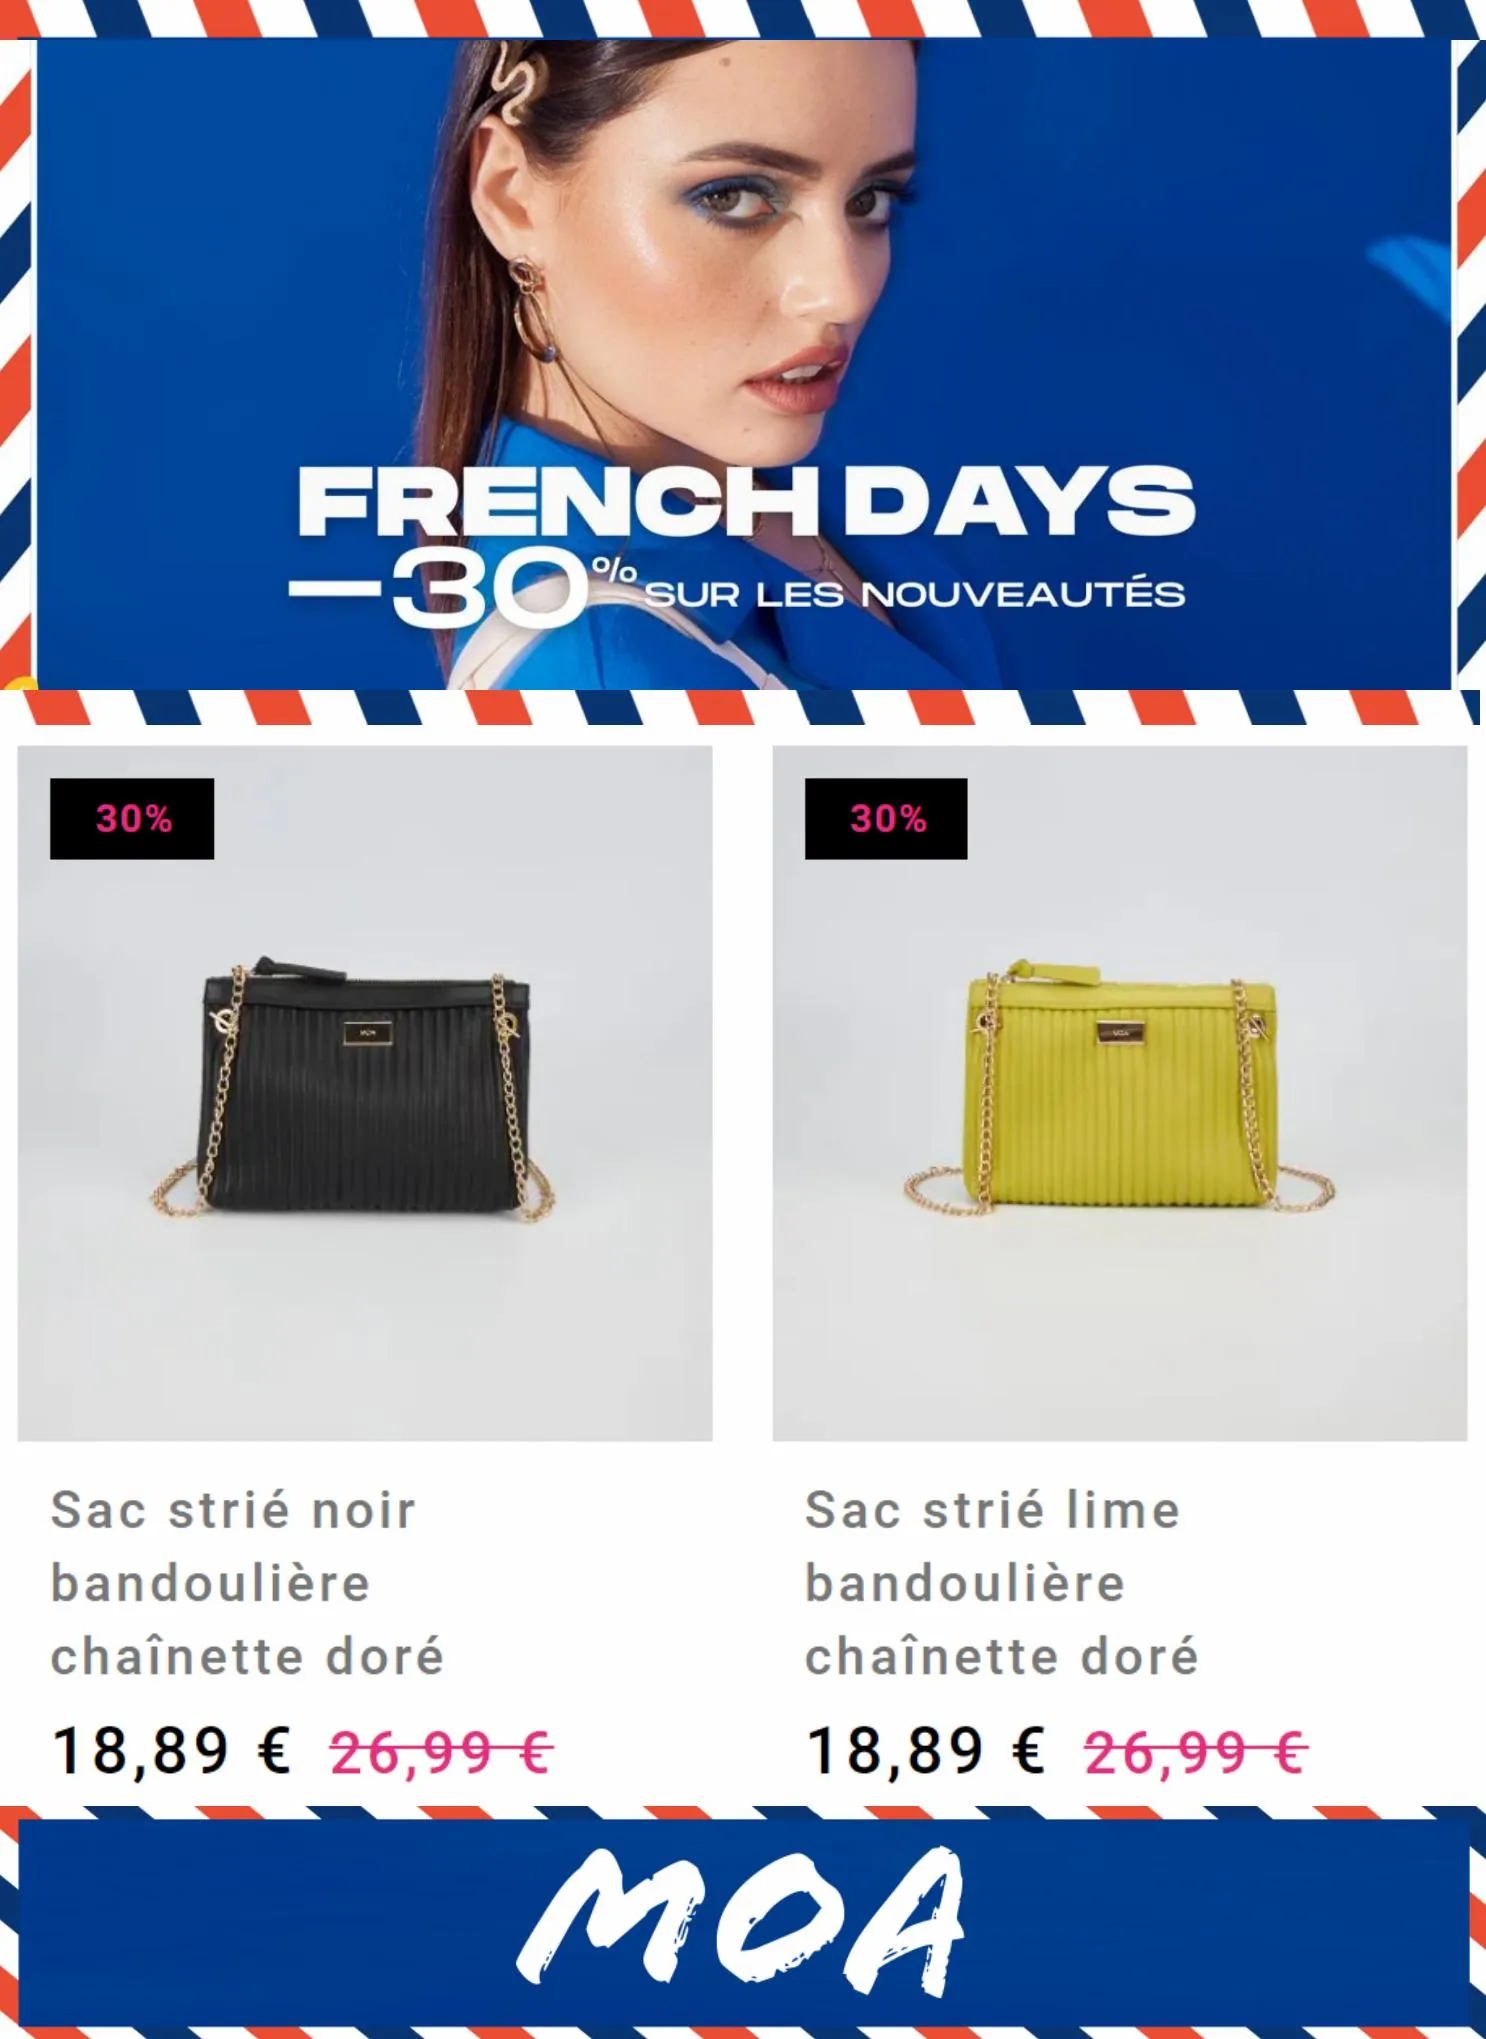 Catalogue French Days -30%*, page 00003